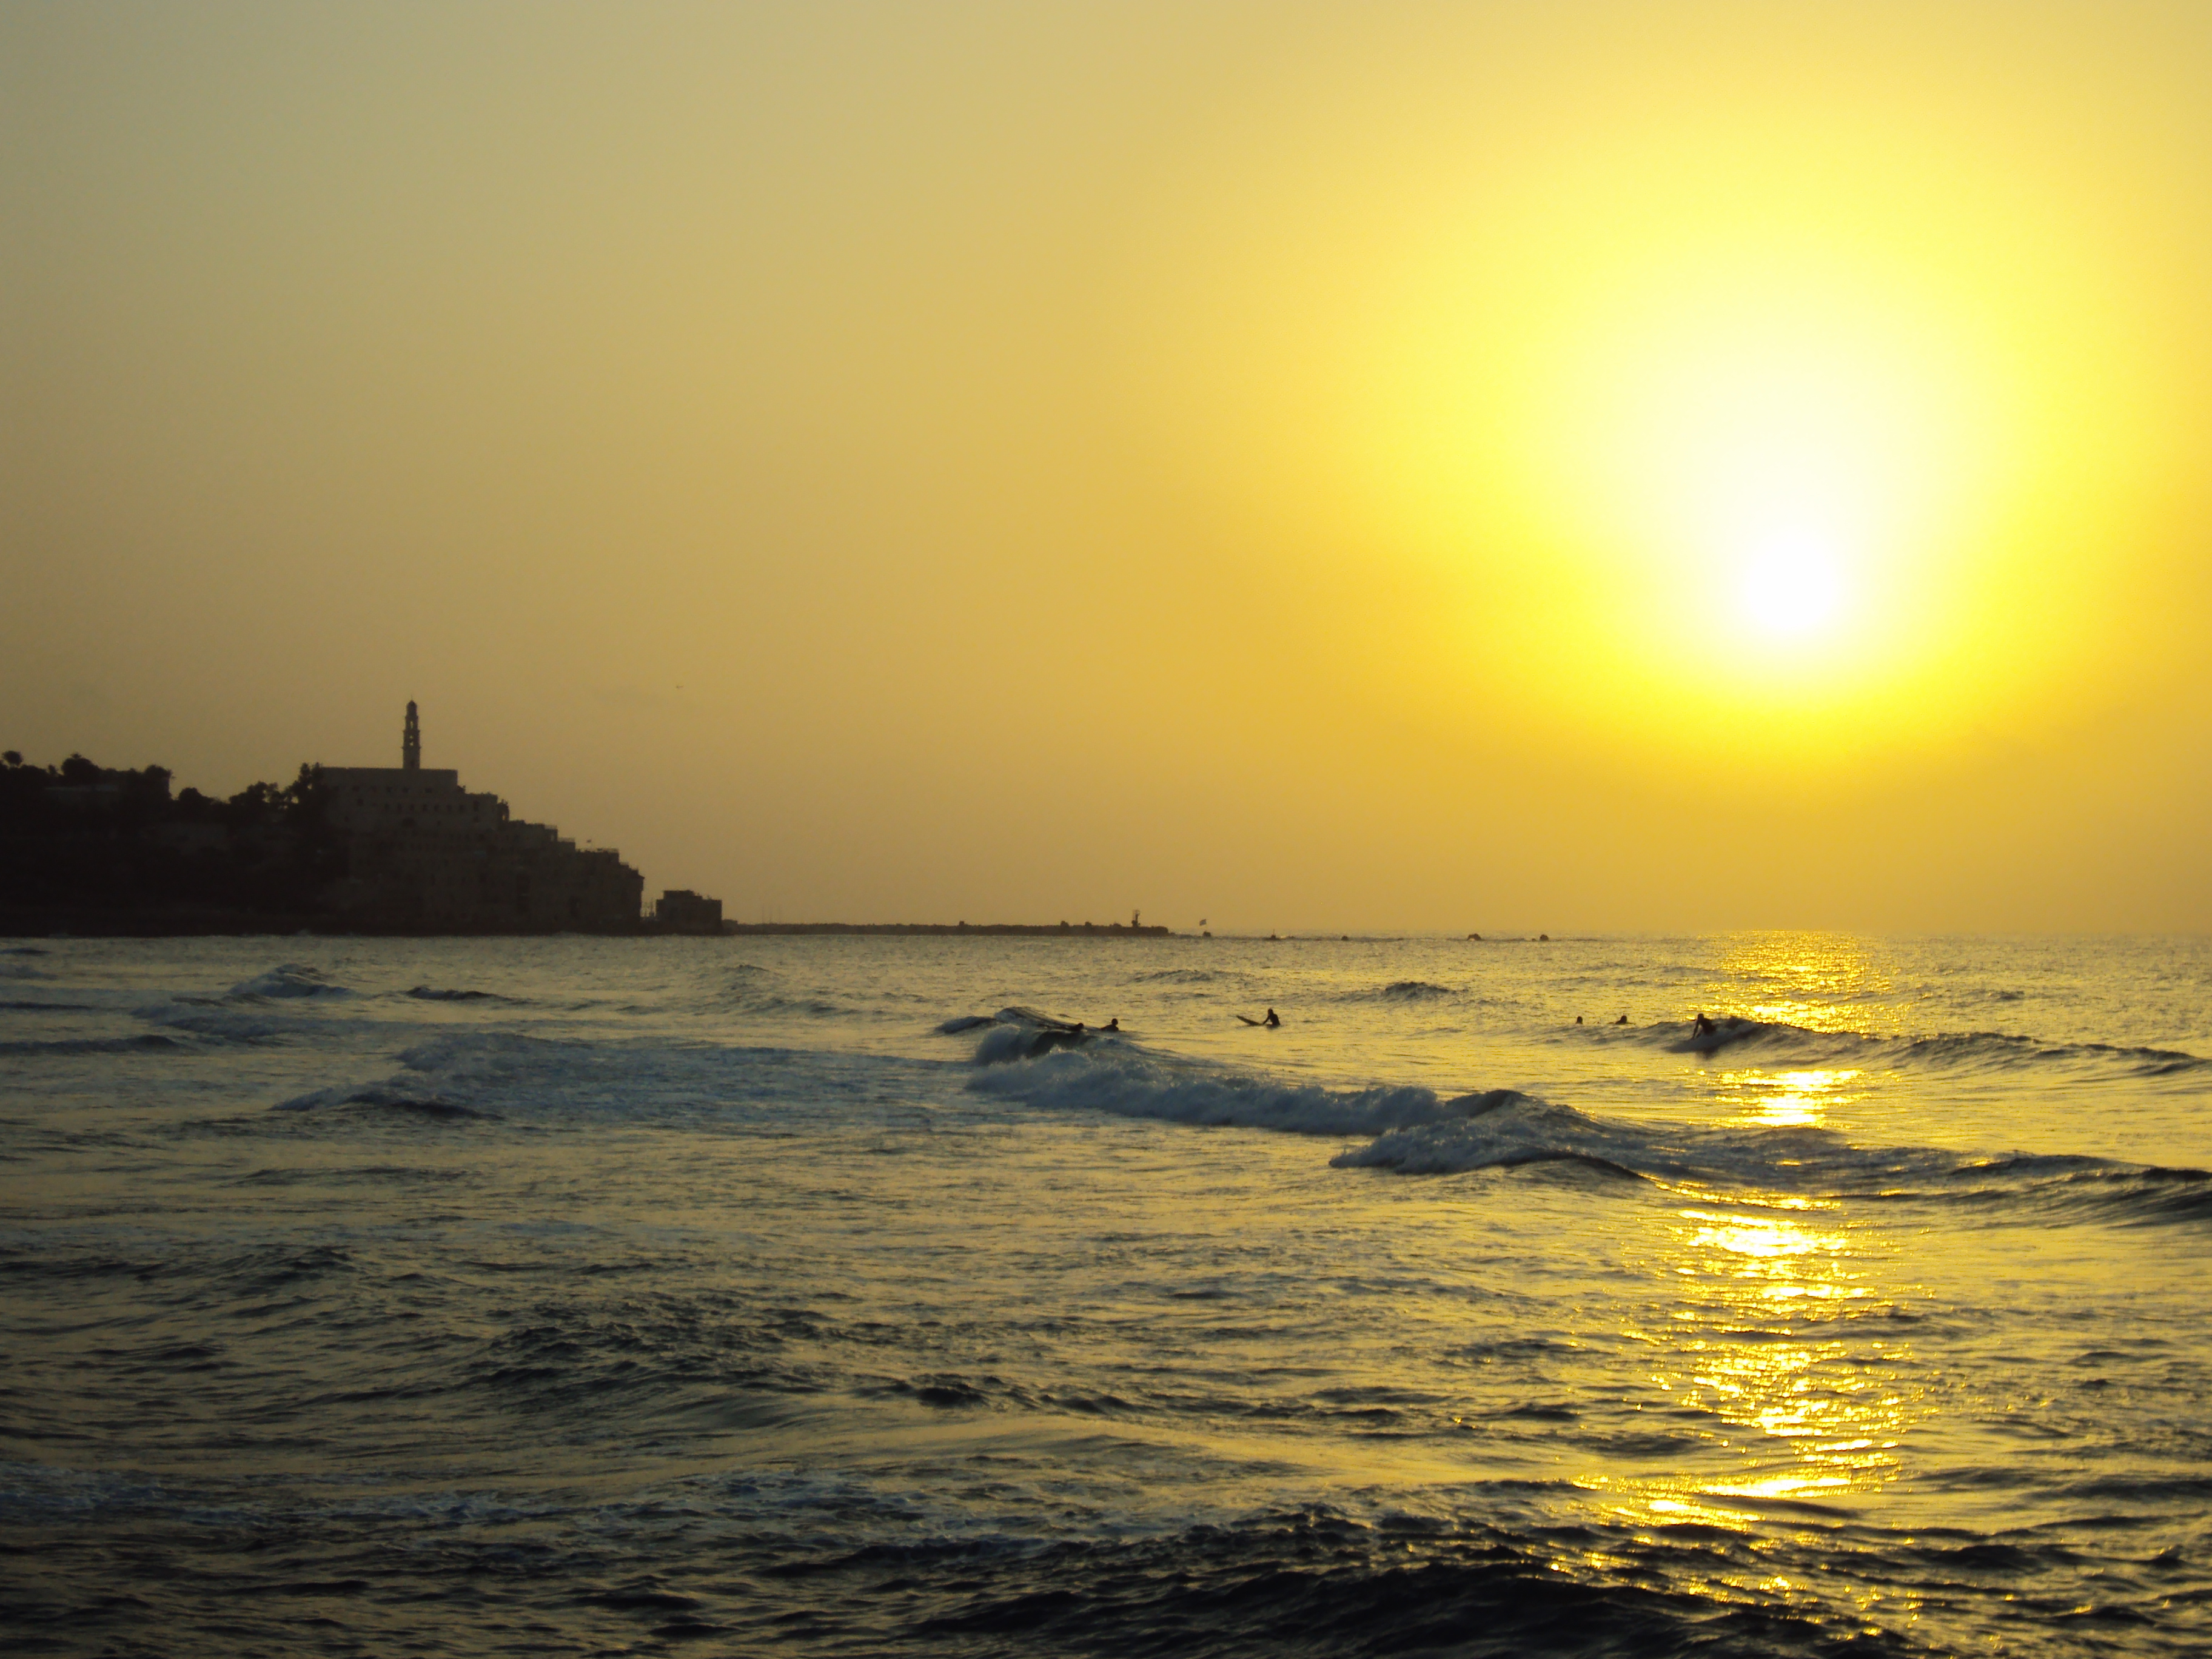 jaffa at sunset with waves